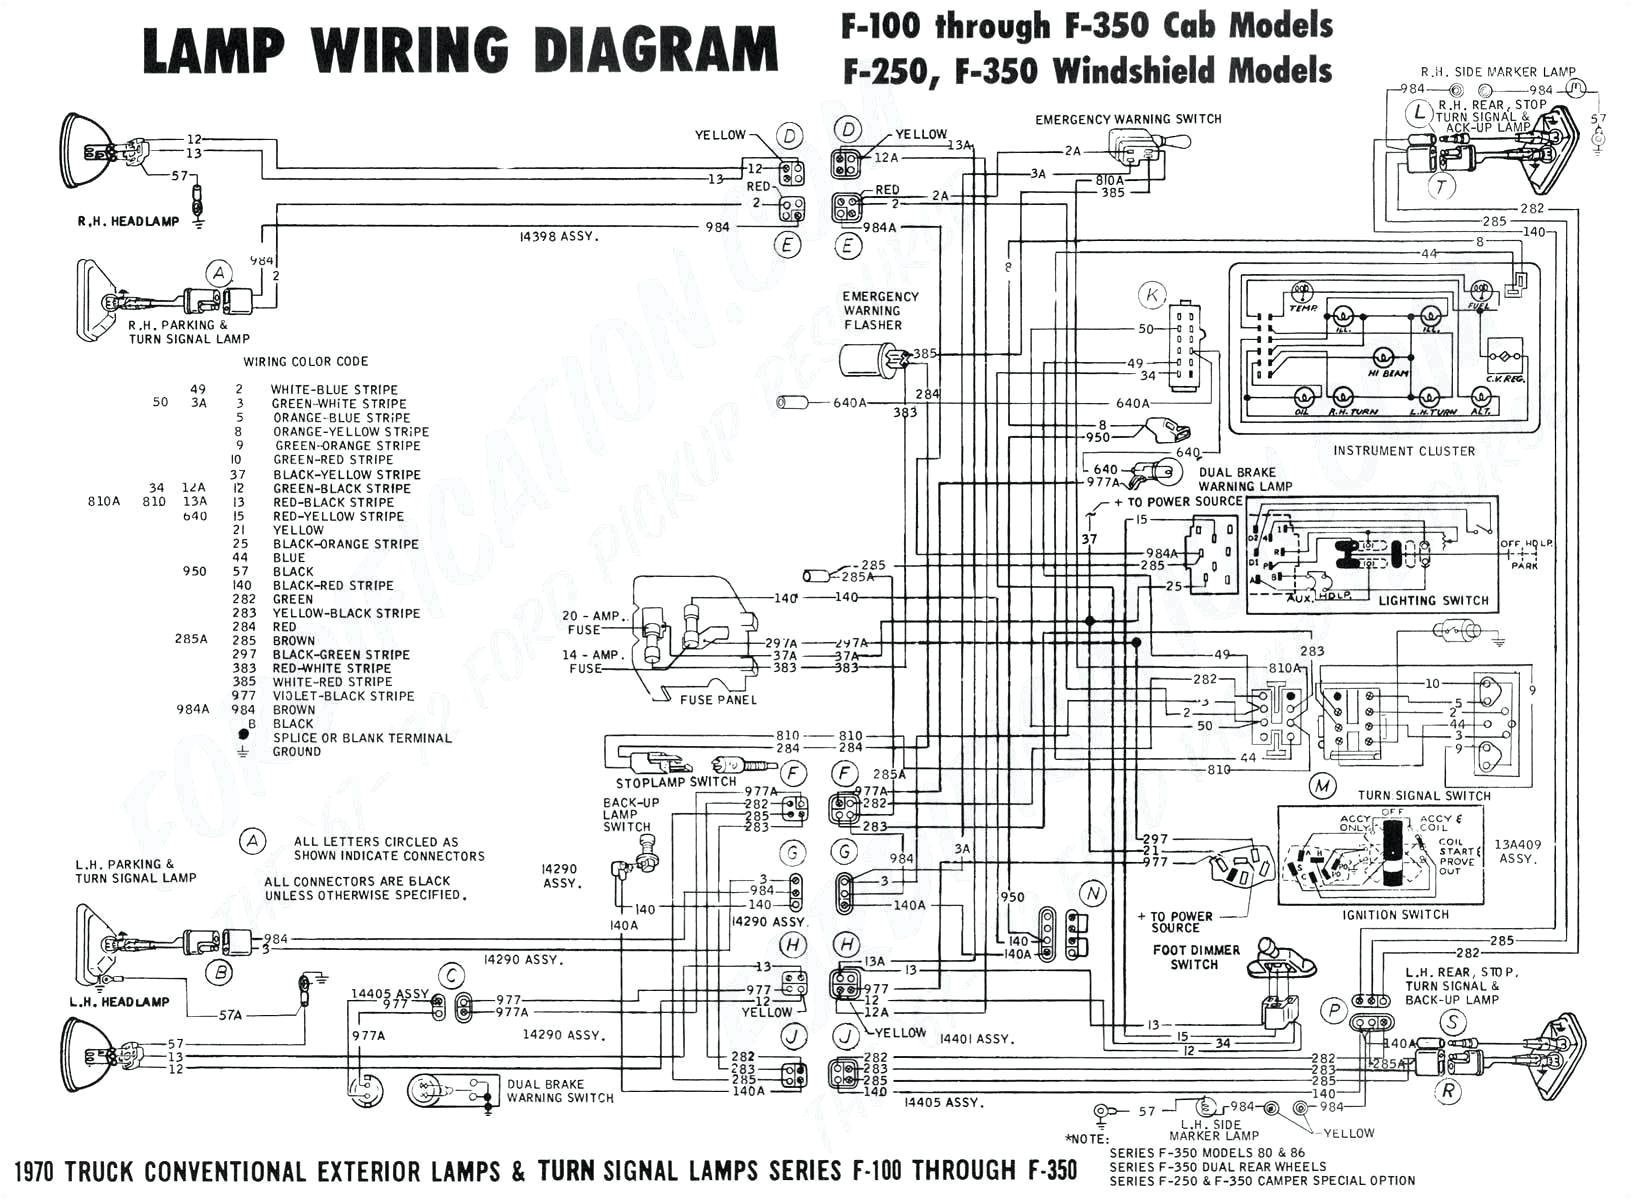 07 ford focus fuse diagram wiring library 2002 ford focus se engine diagram 2002 ford f